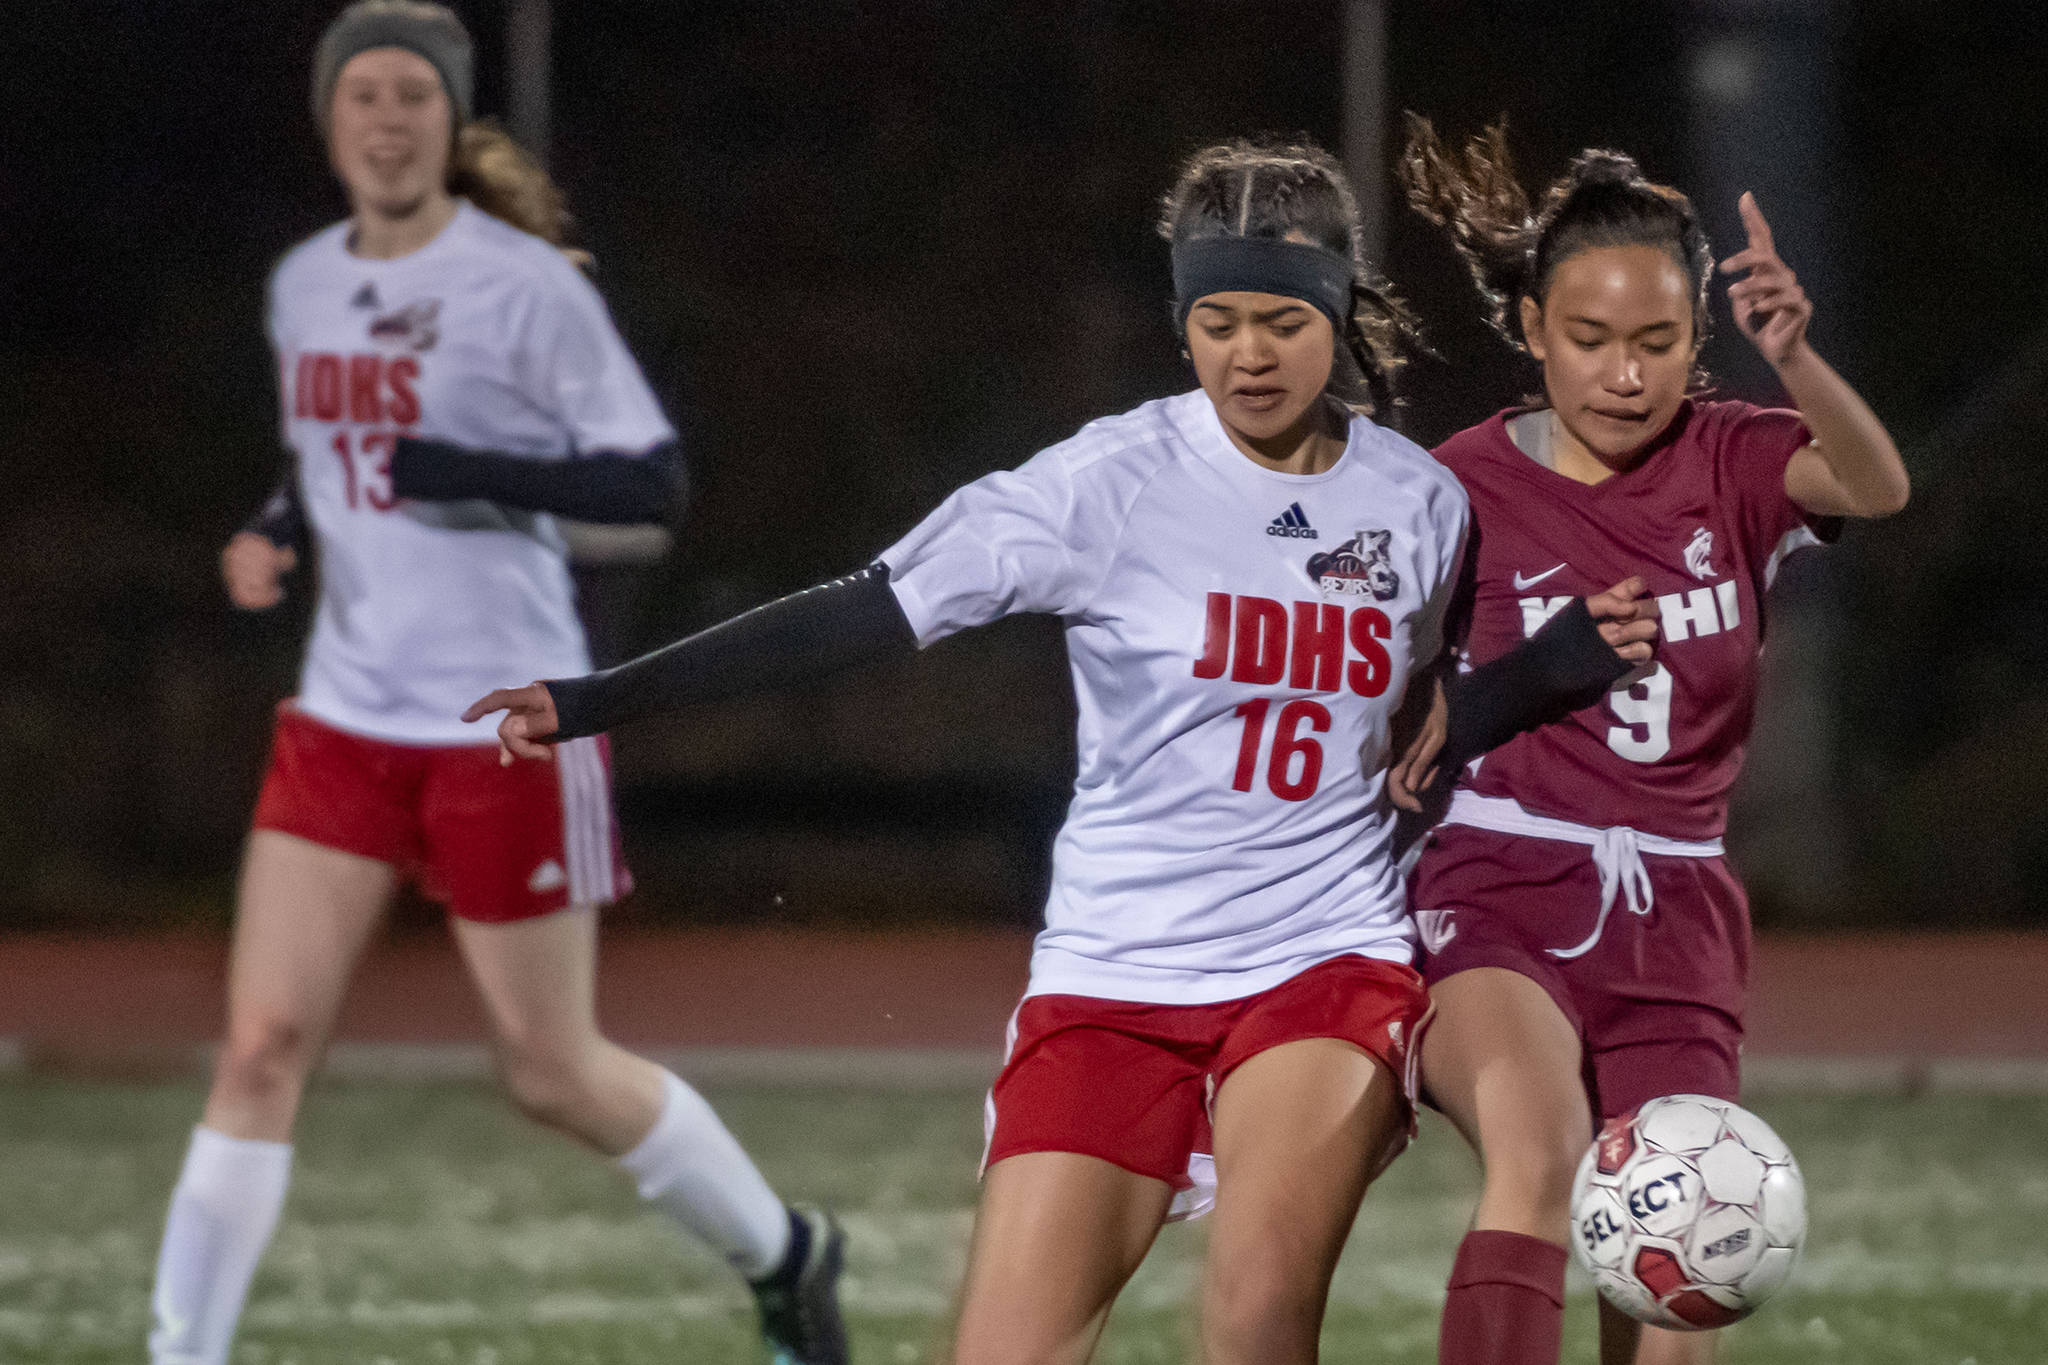 The JDHS girls soccer team is prepared to face one of state’s best teams